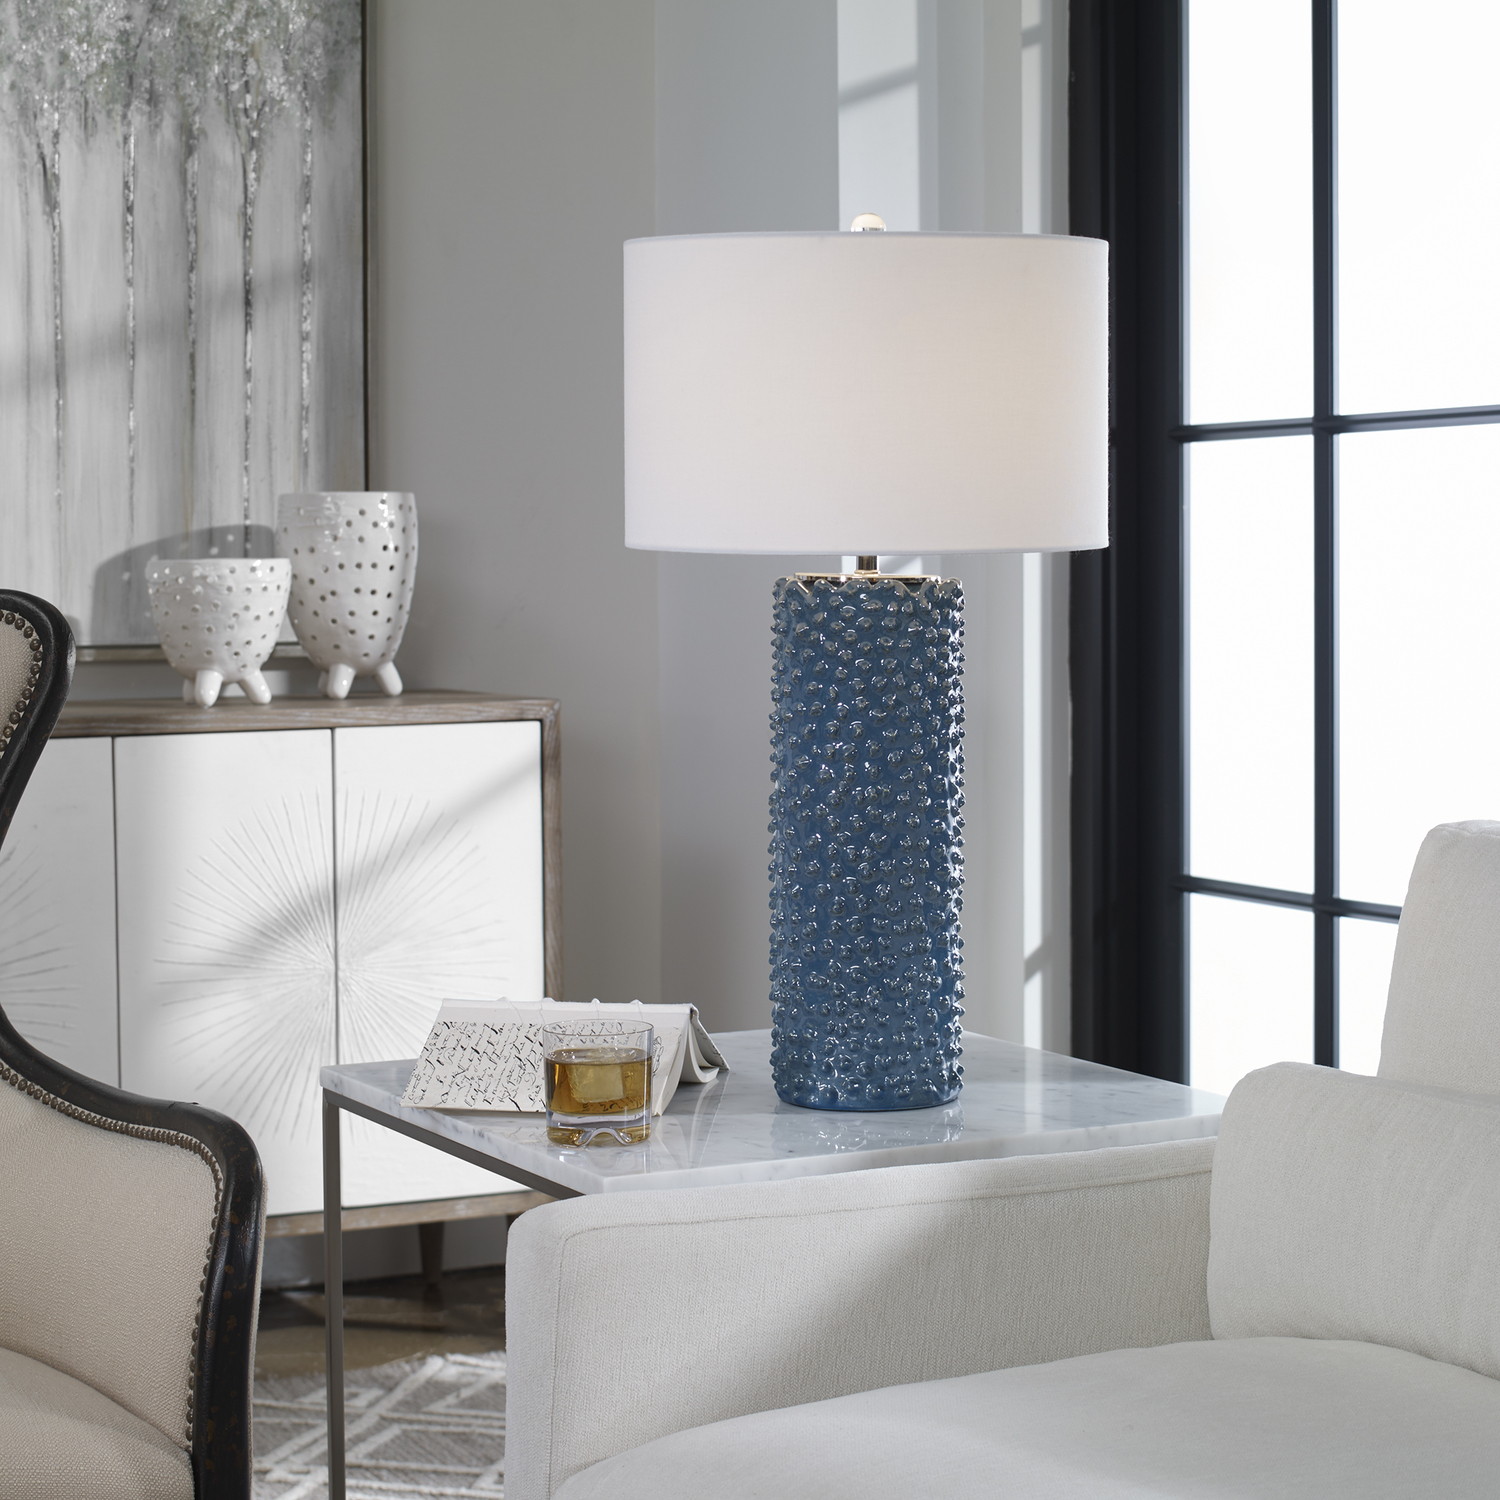 black led table lamp Uttermost Blue Table Lamp Featuring A Casual Coastal Style, This Table Lamp Showcases Textural, Visual Interest Finished In A Deep Indigo Glaze With Brushed Nickel Accents And A Crystal Finial.